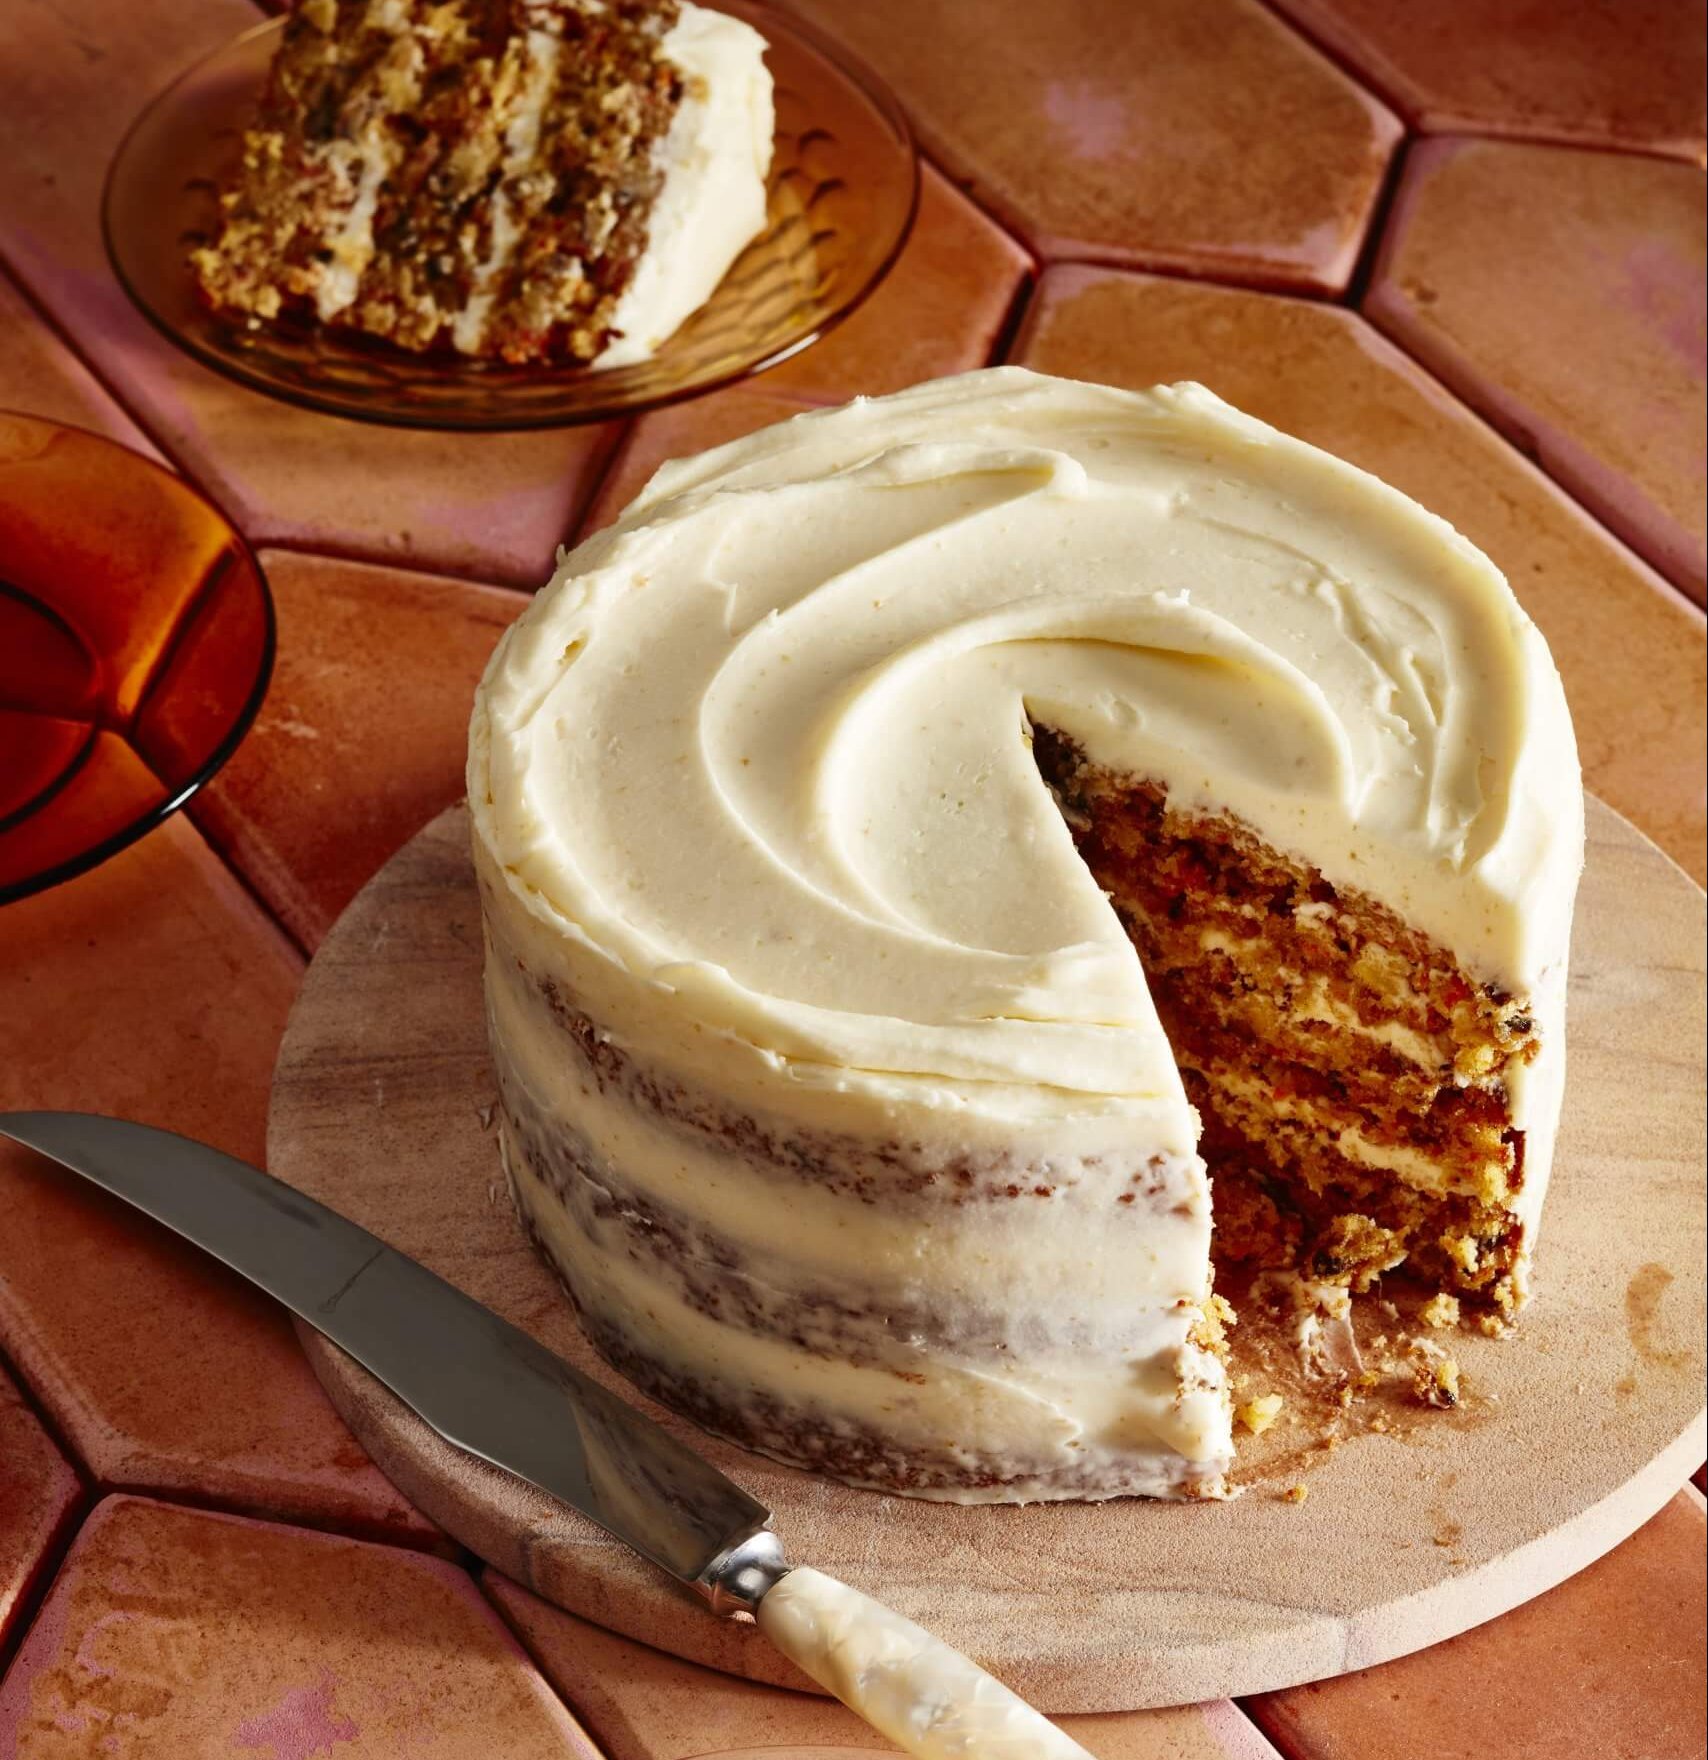 A carrot cake with white frosting and one slice cut out.